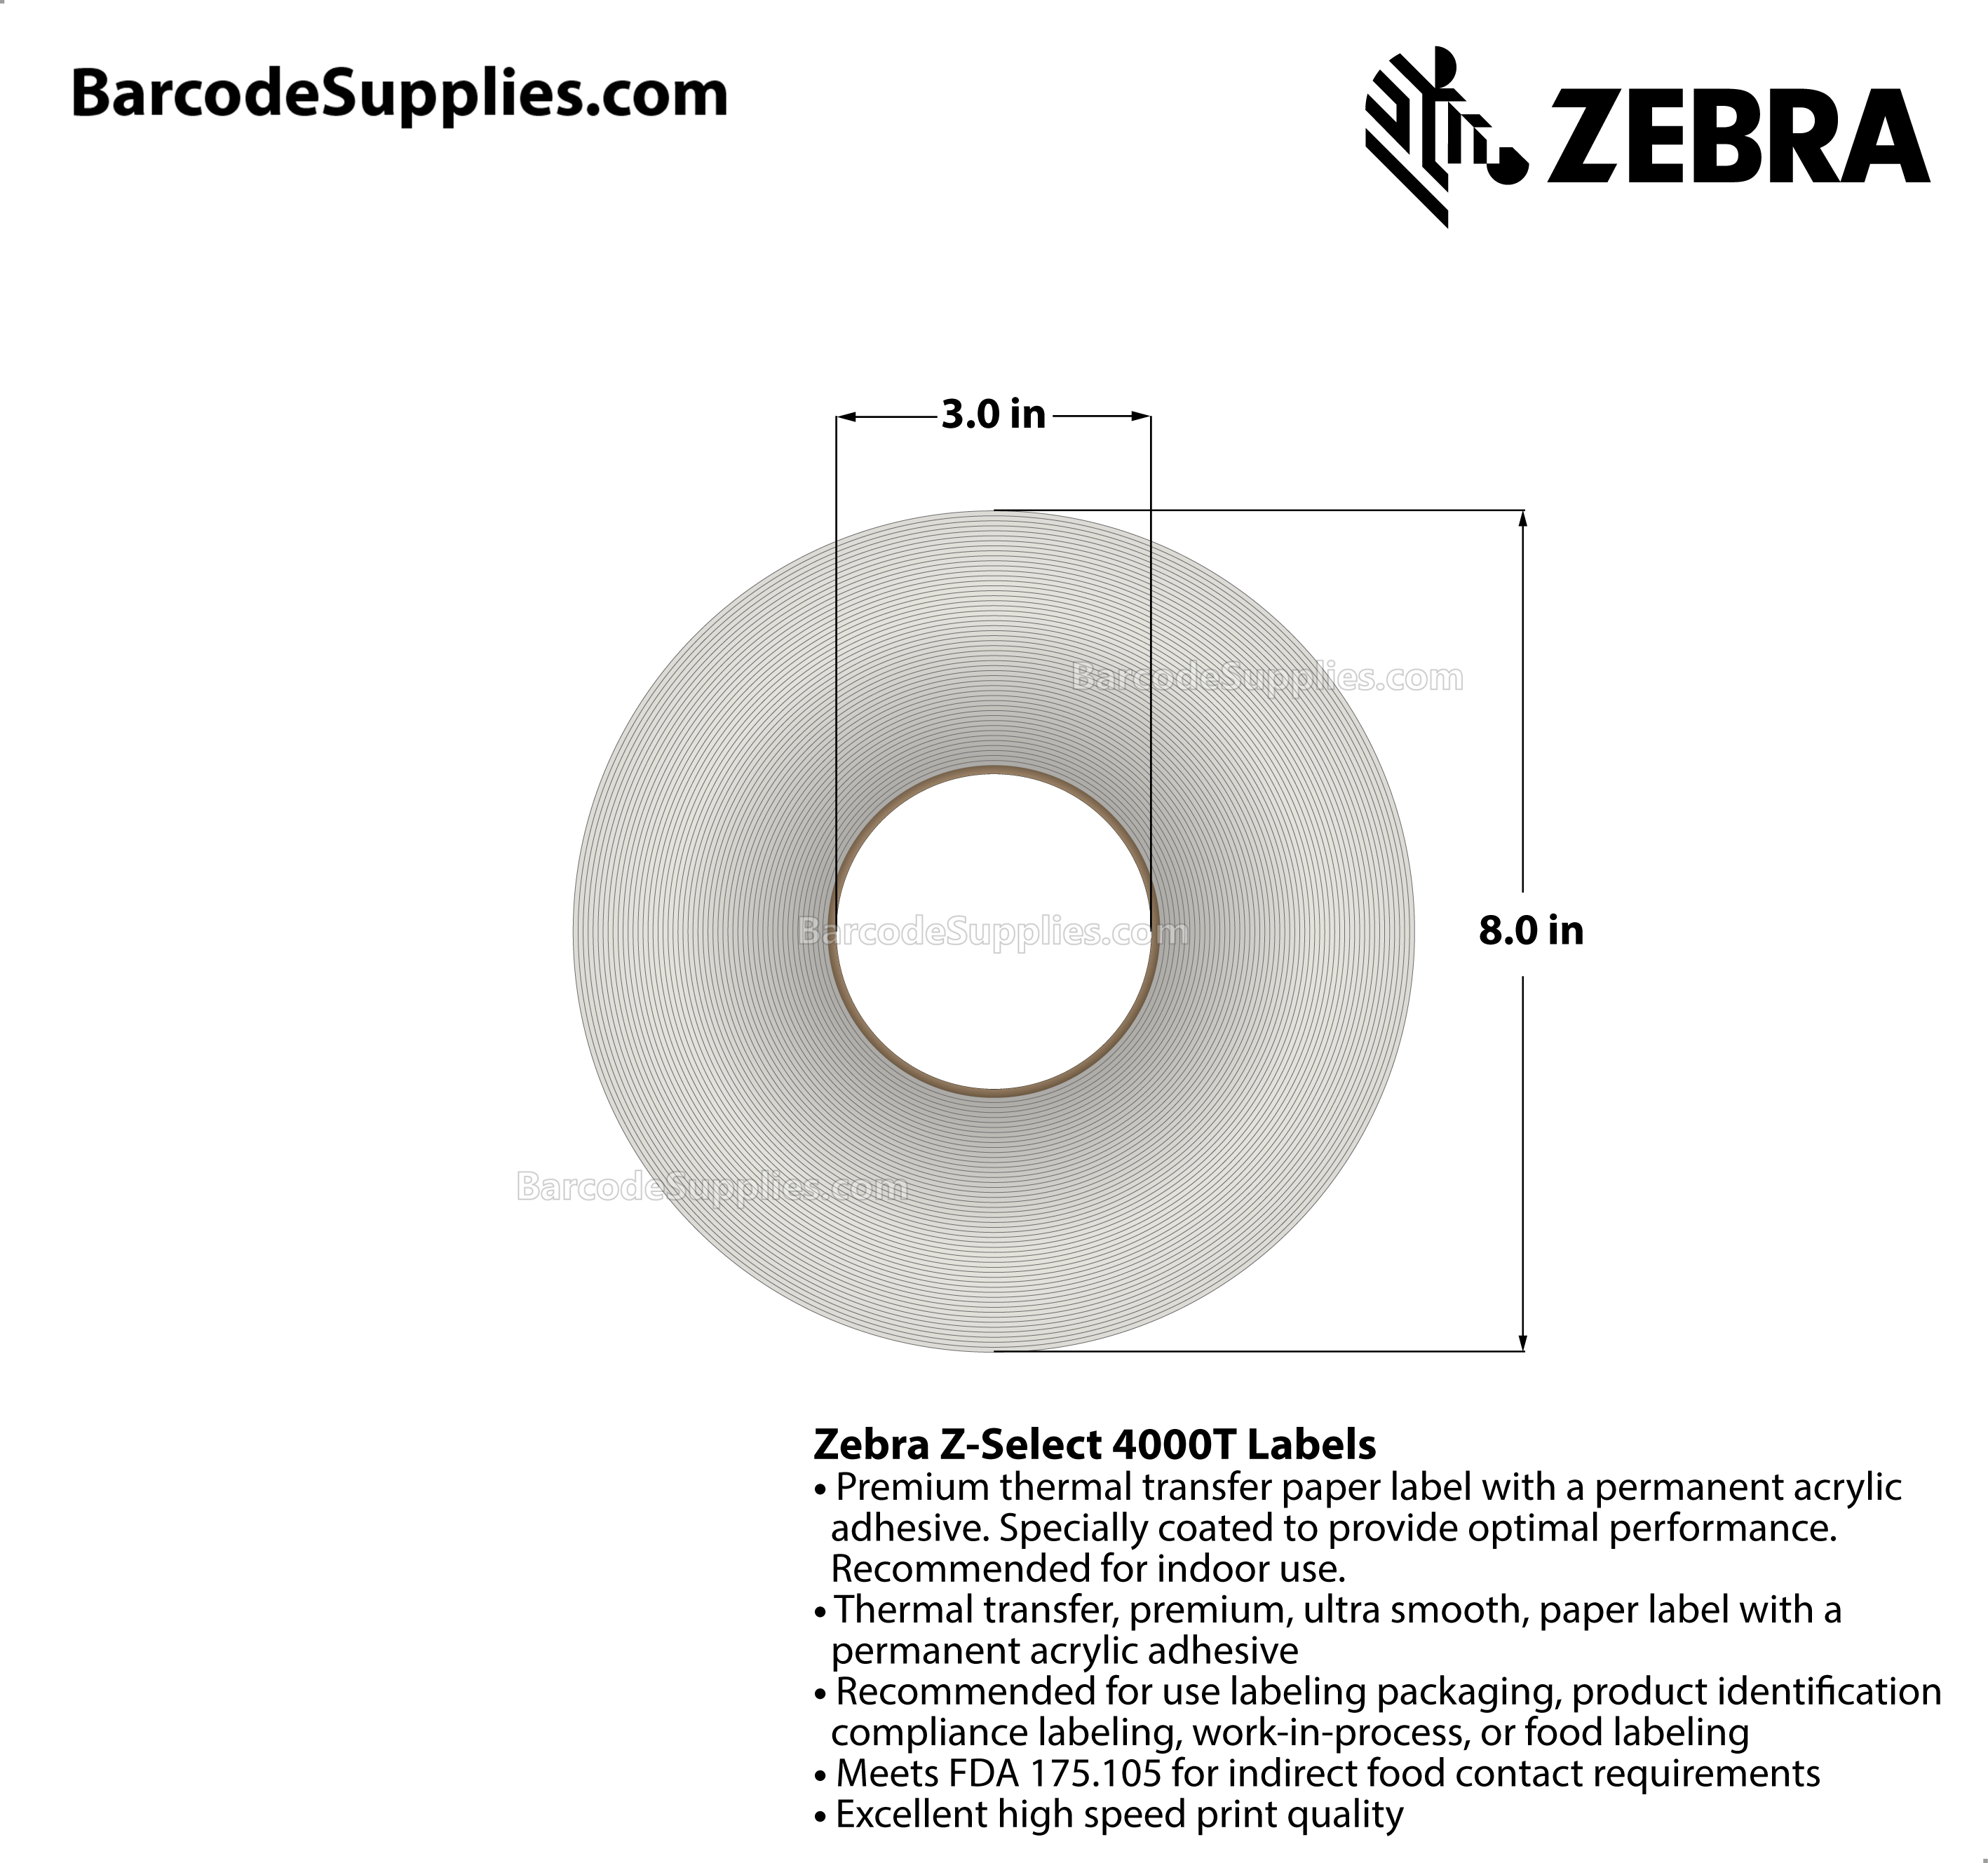 2.25 x 1.25 Thermal Transfer White Z-Select 4000T (No Perf) Labels With Permanent Adhesive - Not Perforated - 4240 Labels Per Roll - Carton Of 8 Rolls - 33920 Labels Total - MPN: 72283